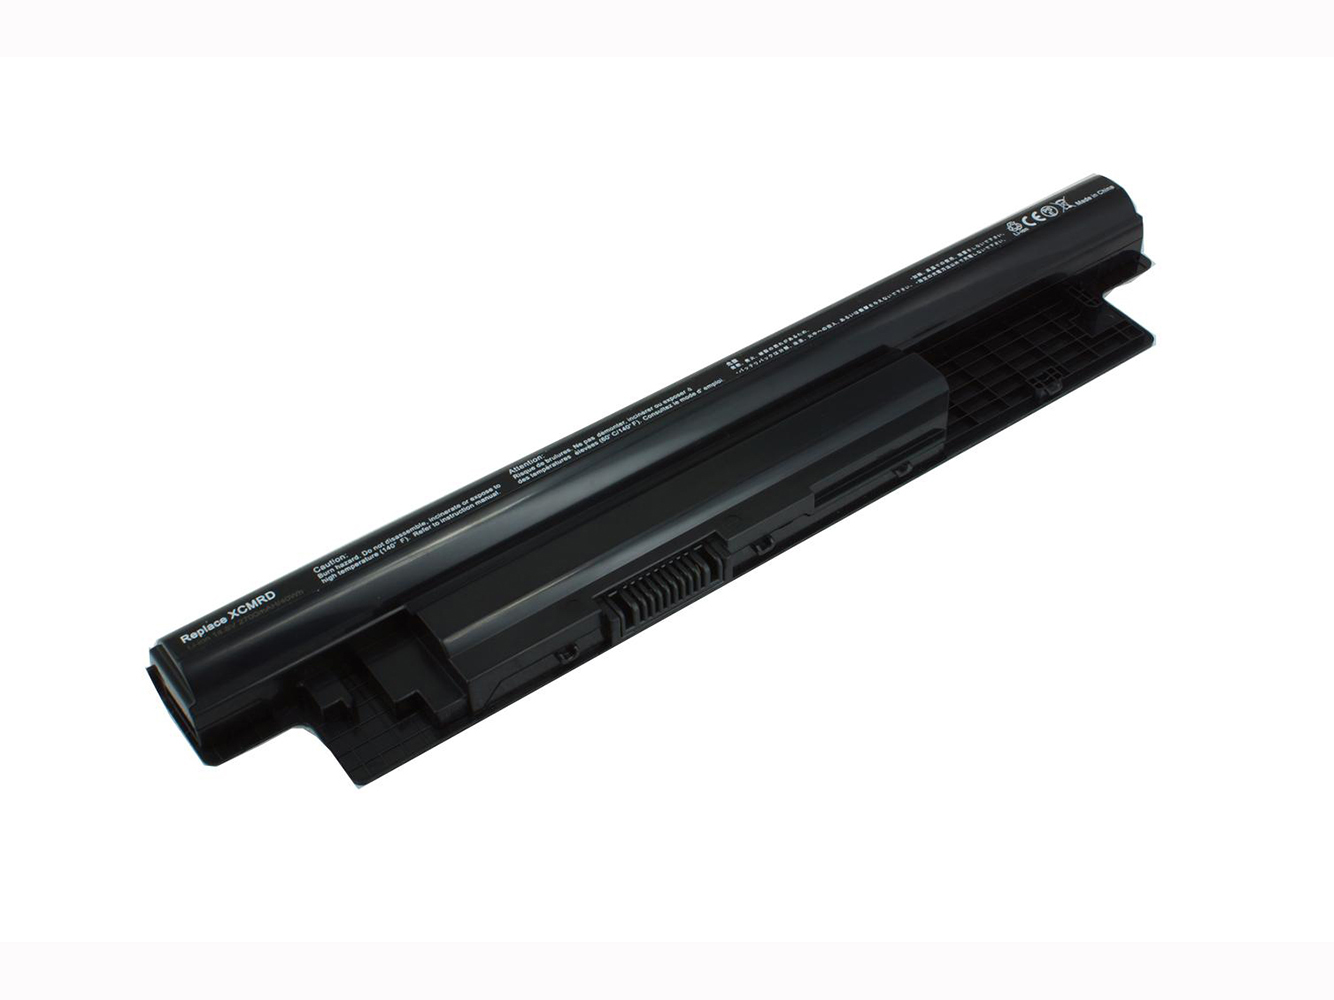 Dell 0mf69, 312-1387 Laptop Batteries replacement